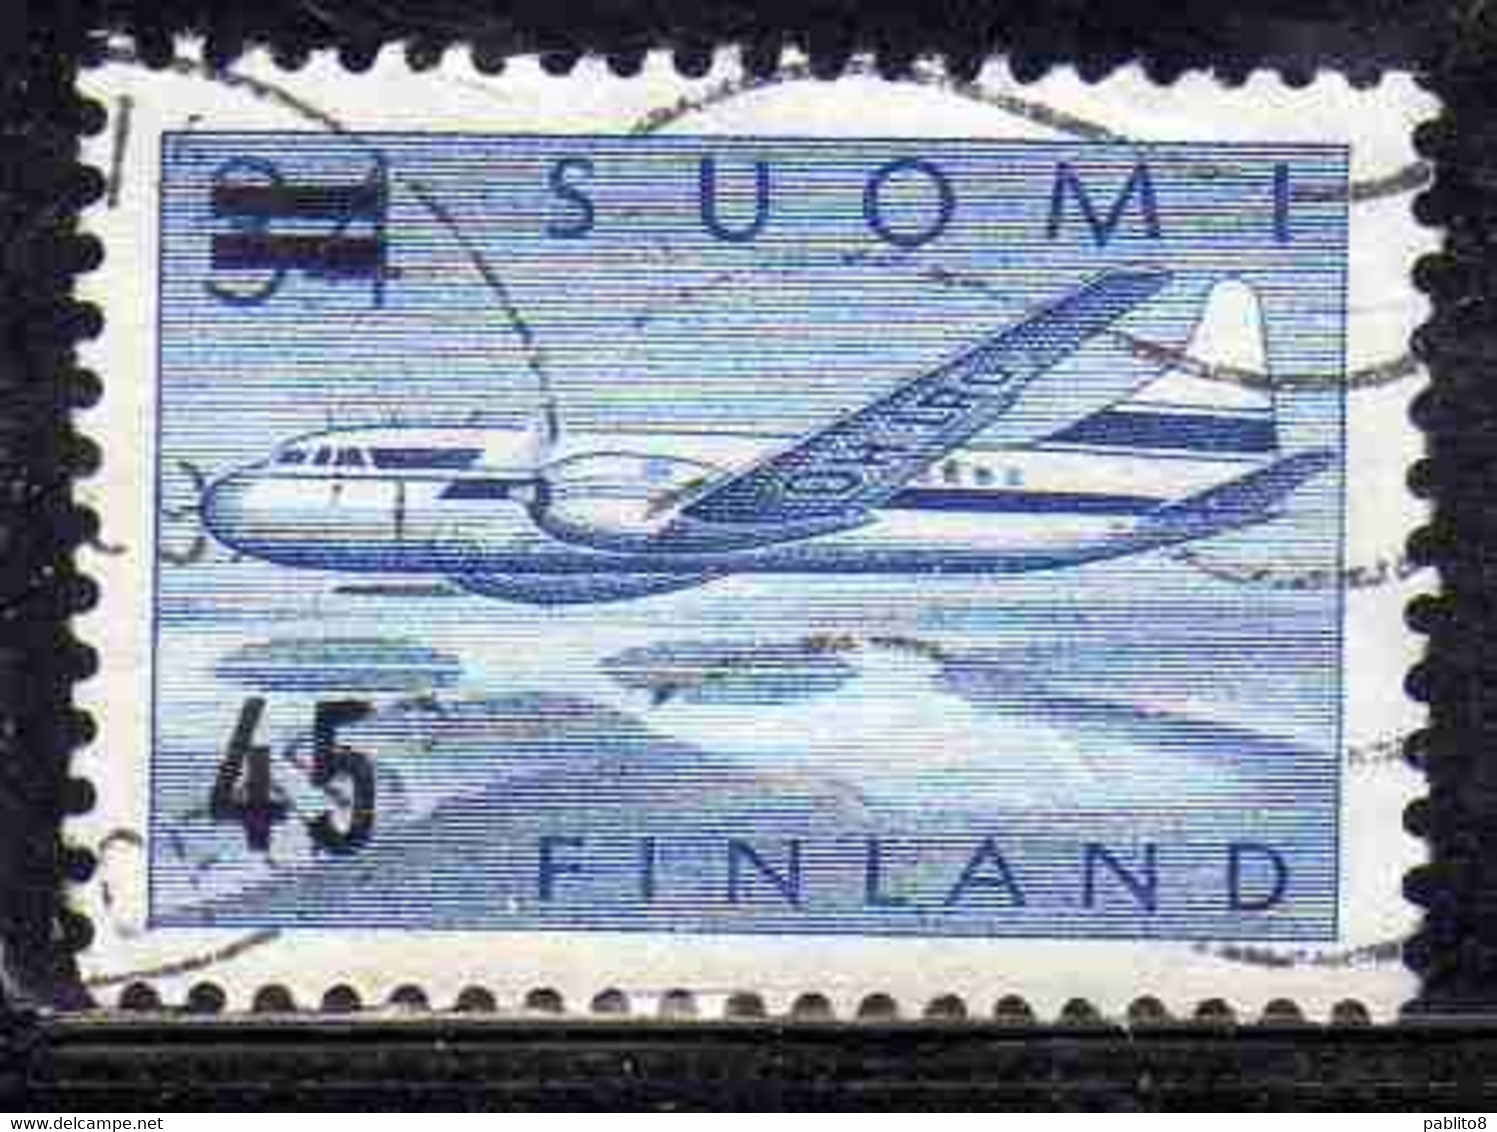 SUOMI FINLAND FINLANDIA FINLANDE 1959 SURCHARGED AIR POST MAIL AIRMAIL CONVAIR OVER LAKES 45 On 34m USED USATO OBLITERE' - Used Stamps